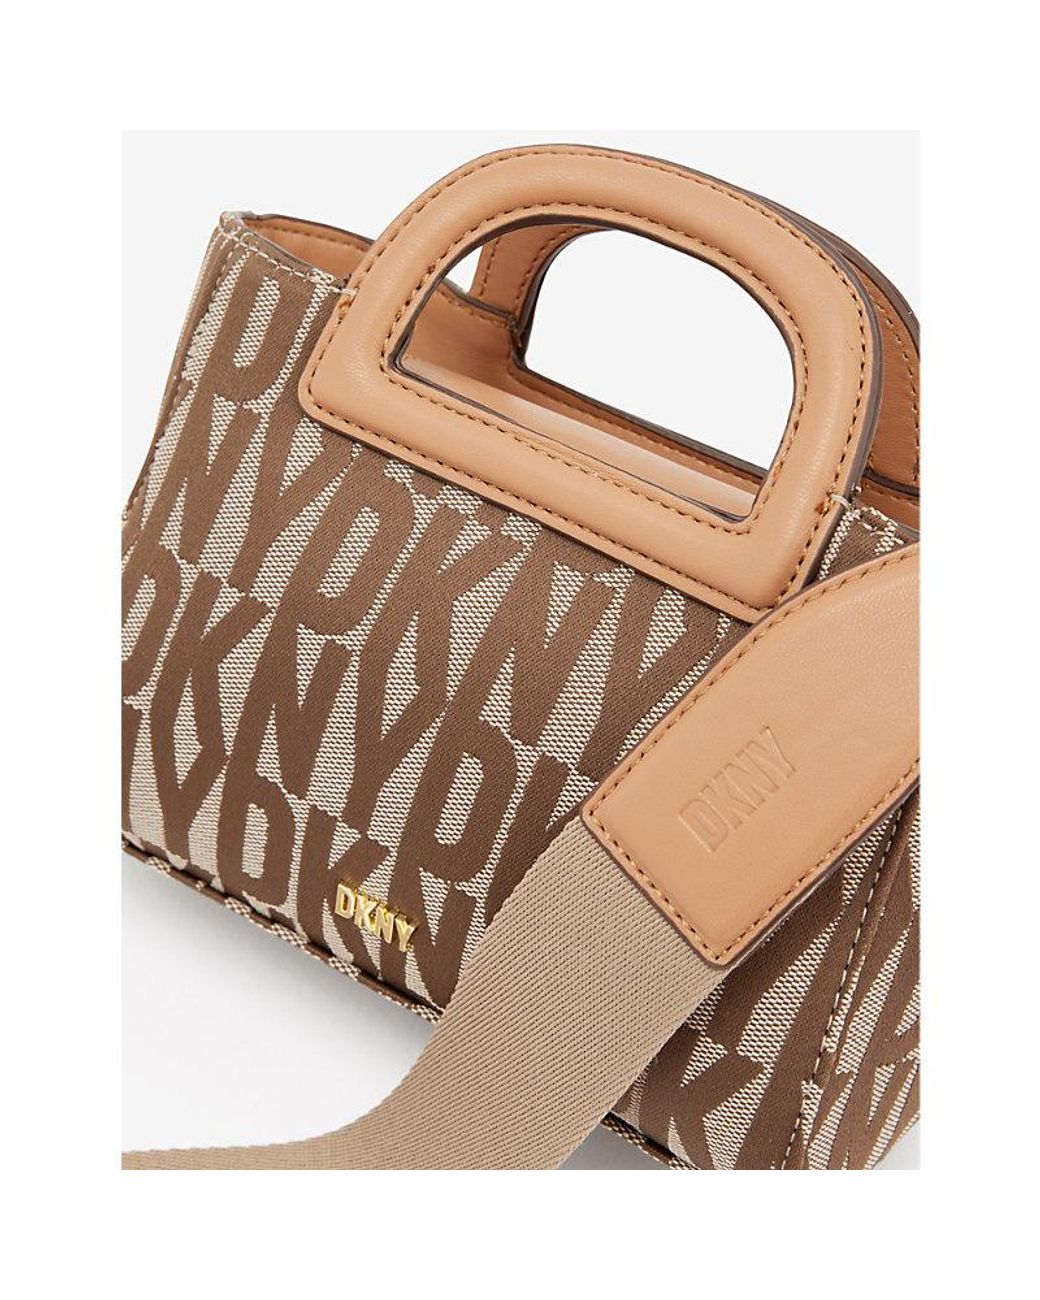 DKNY tote bag with dust bag